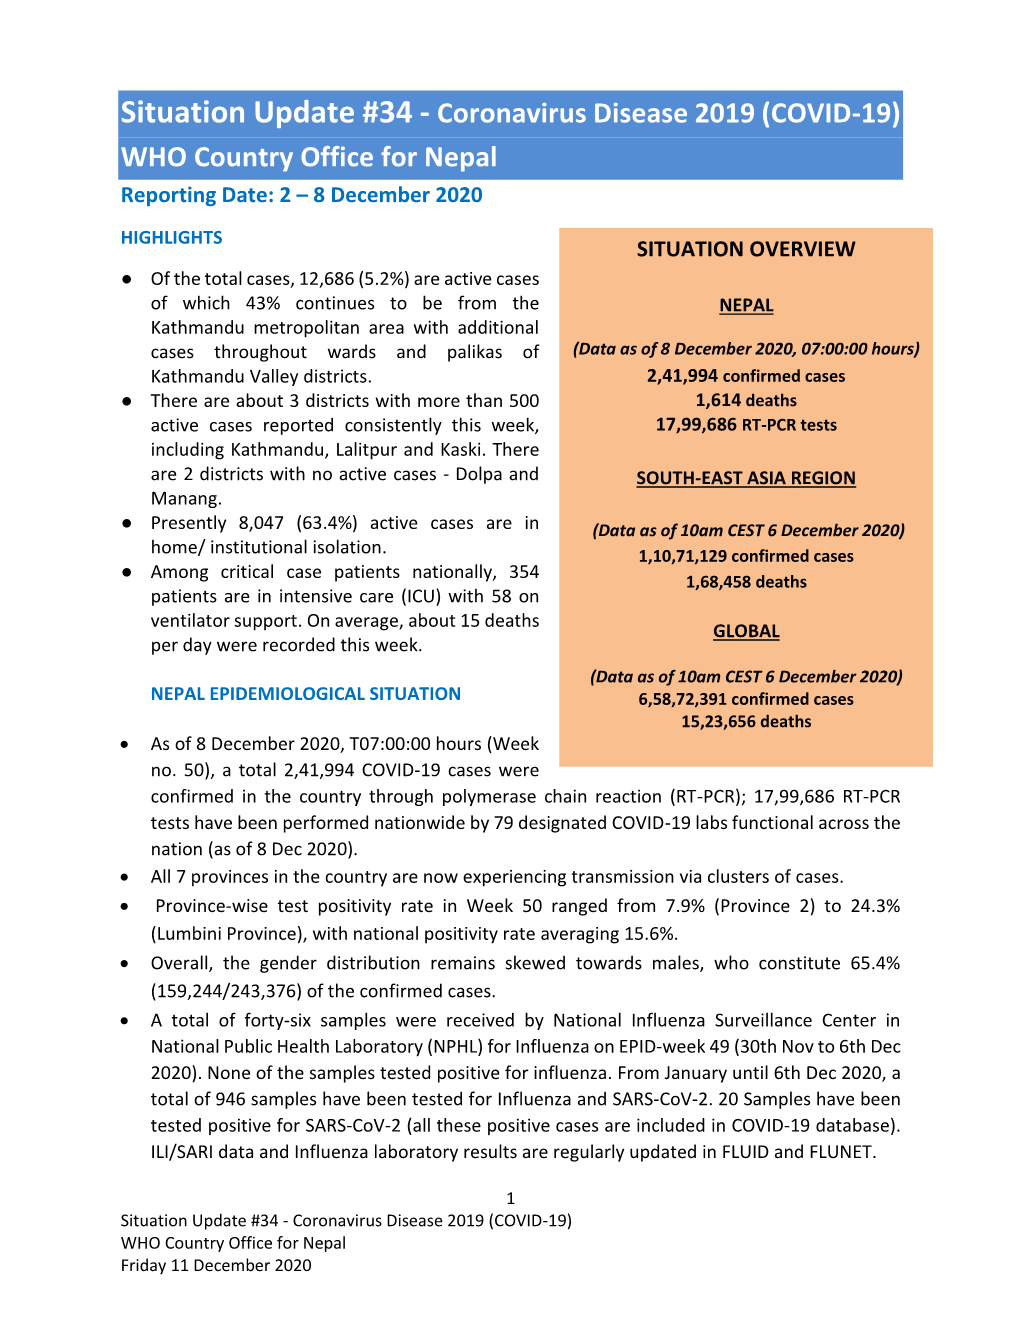 Situation Update #34 - Coronavirus Disease 2019 (COVID-19) WHO Country Office for Nepal Reporting Date: 2 – 8 December 2020